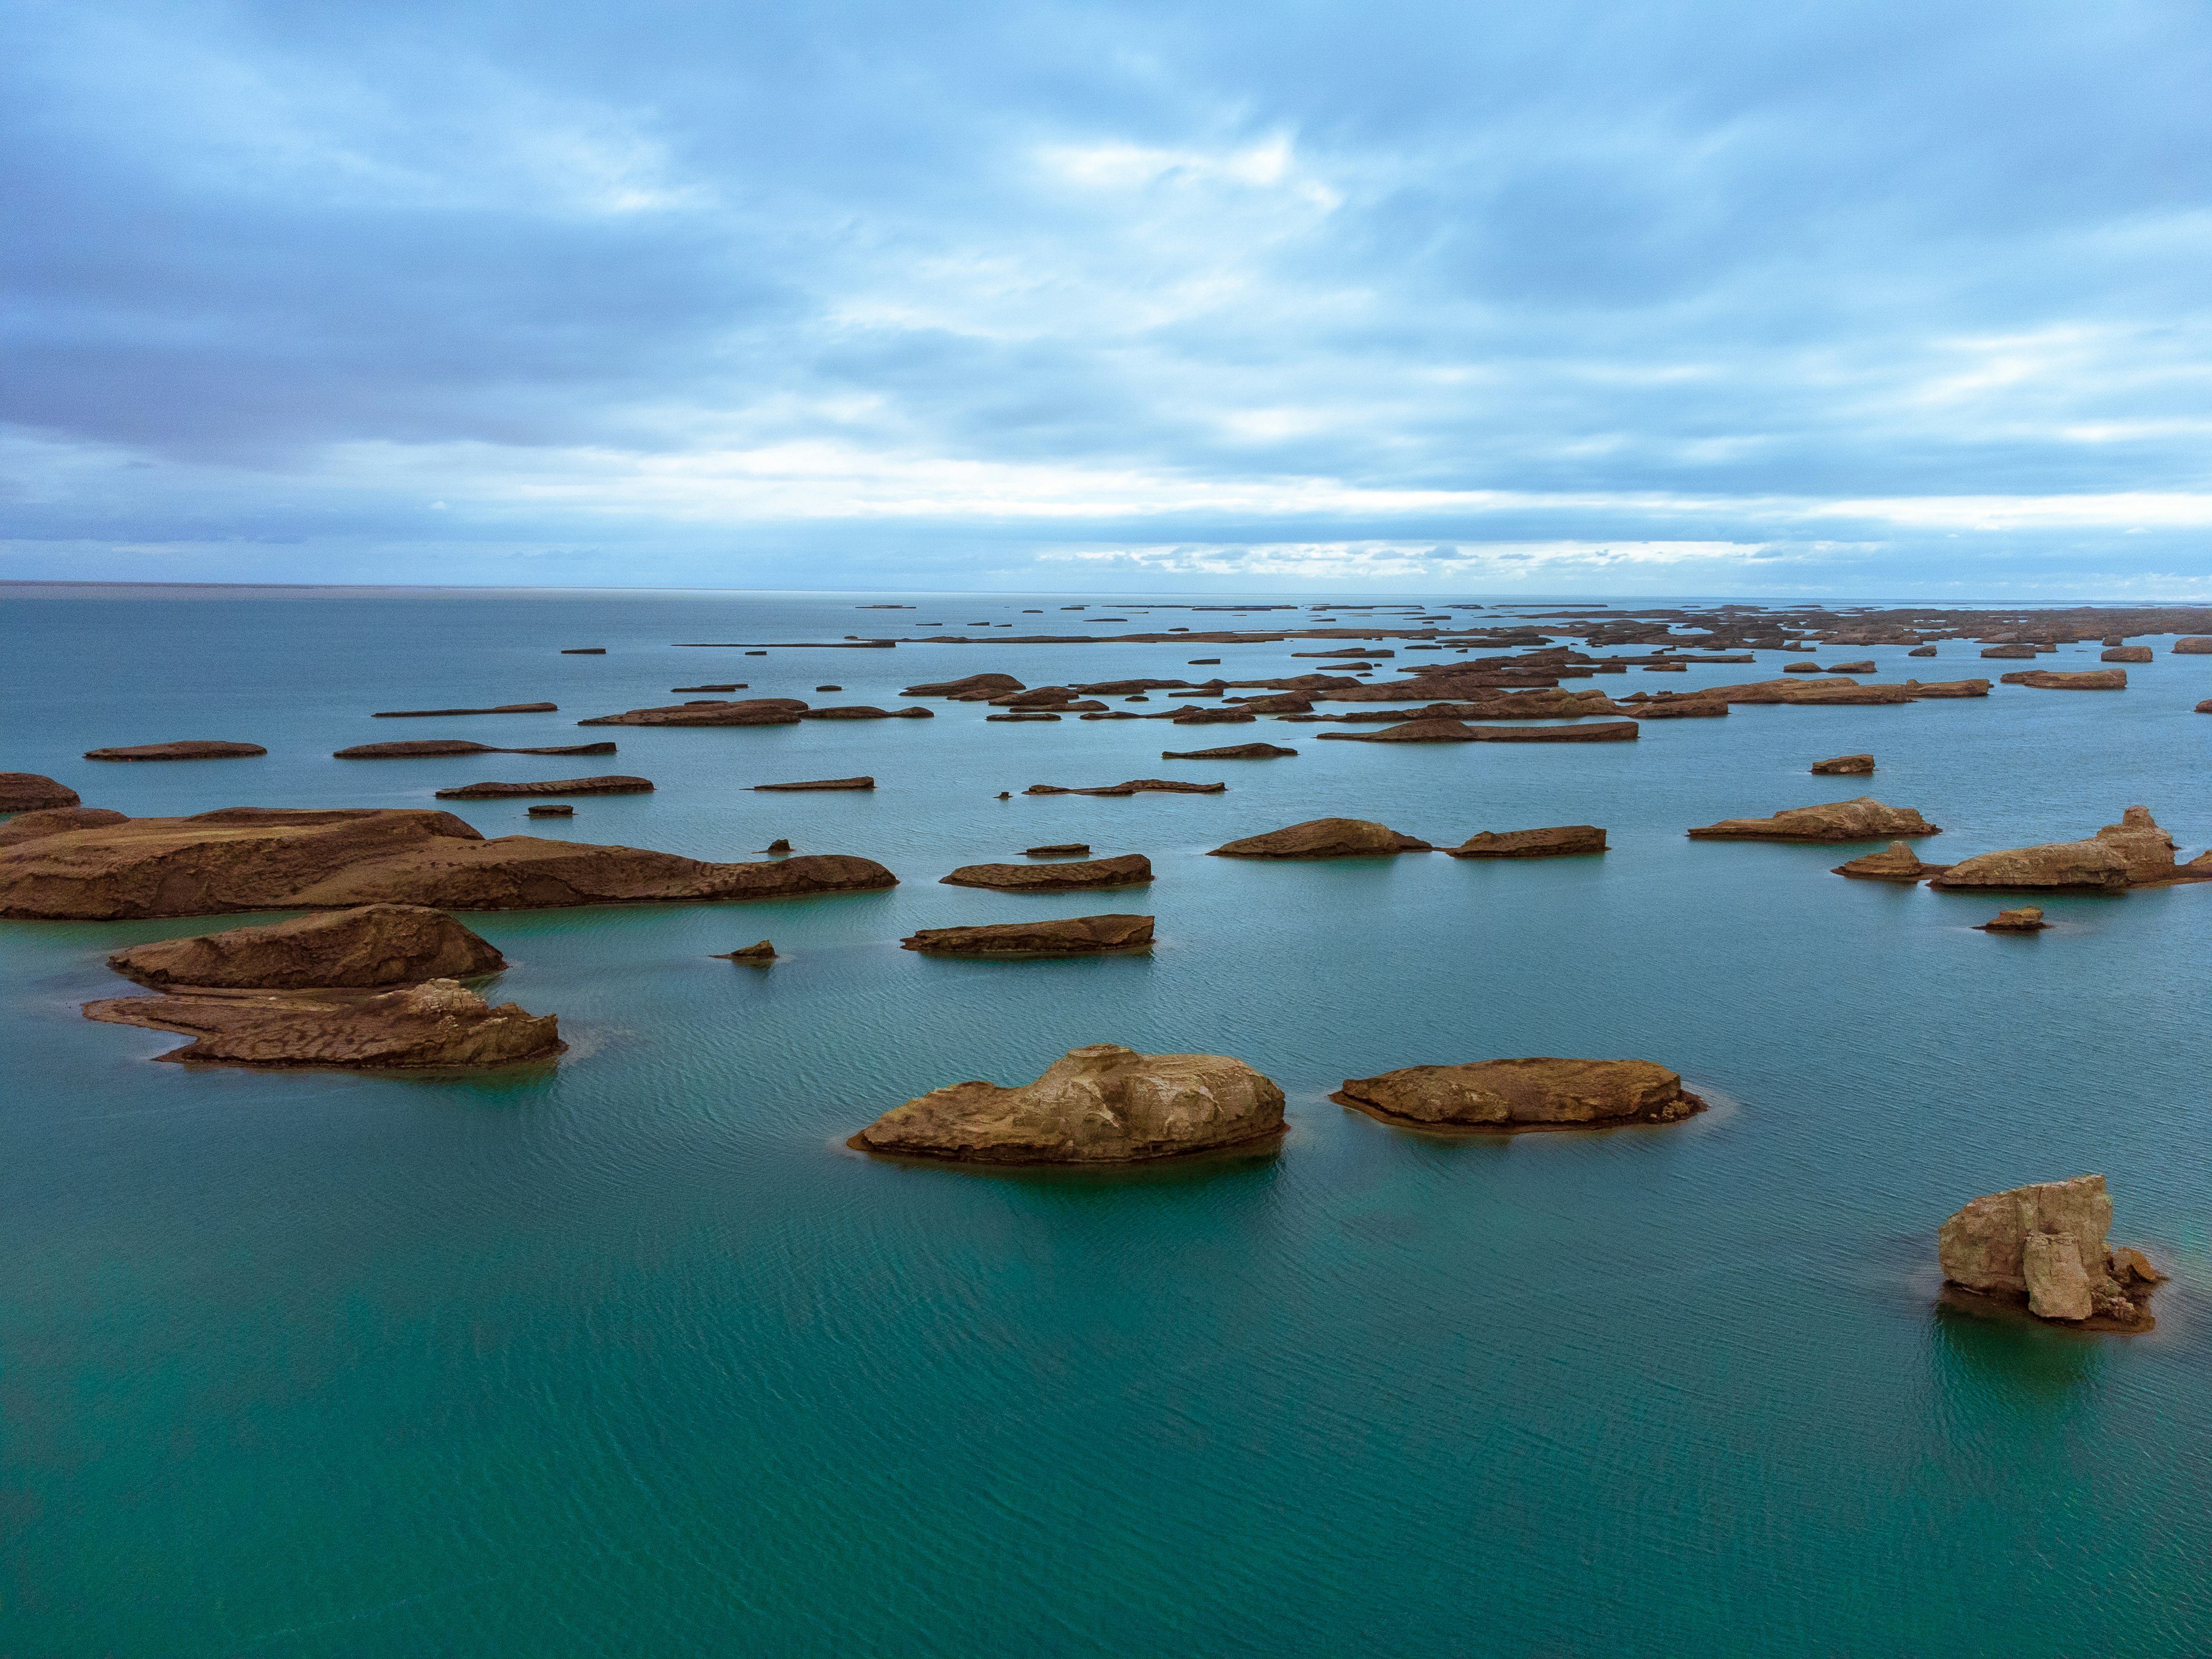 brown rocks on blue sea under white clouds and blue sky during daytime